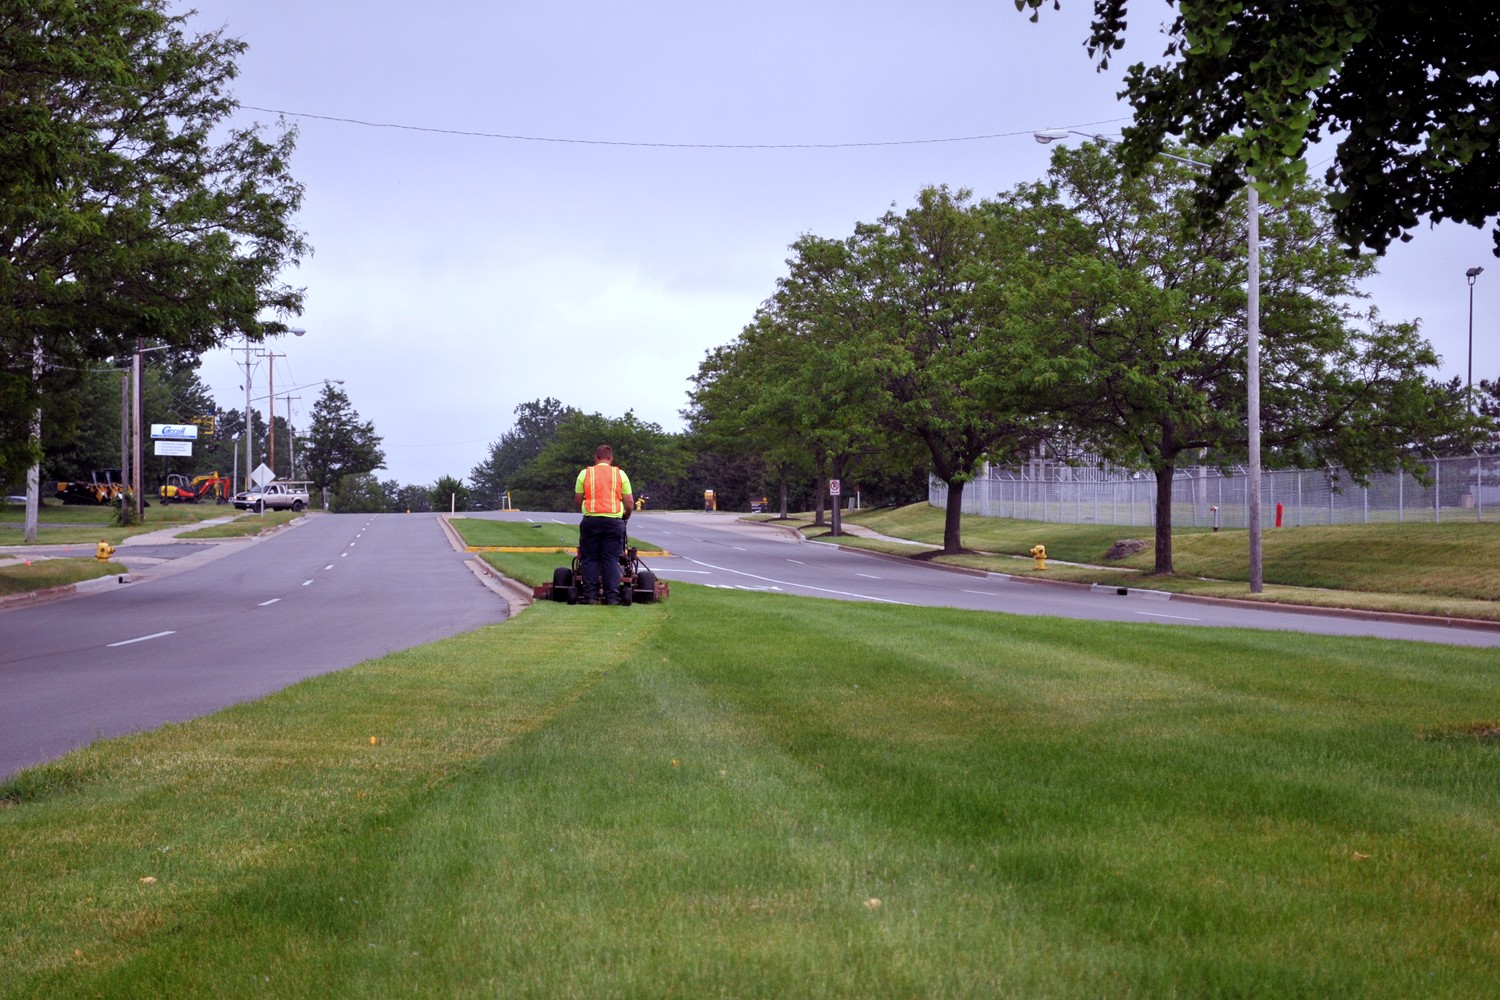 Lawn Mowing Service for Business and Residential in Grand Rapids MI - ProMowLandscape.com